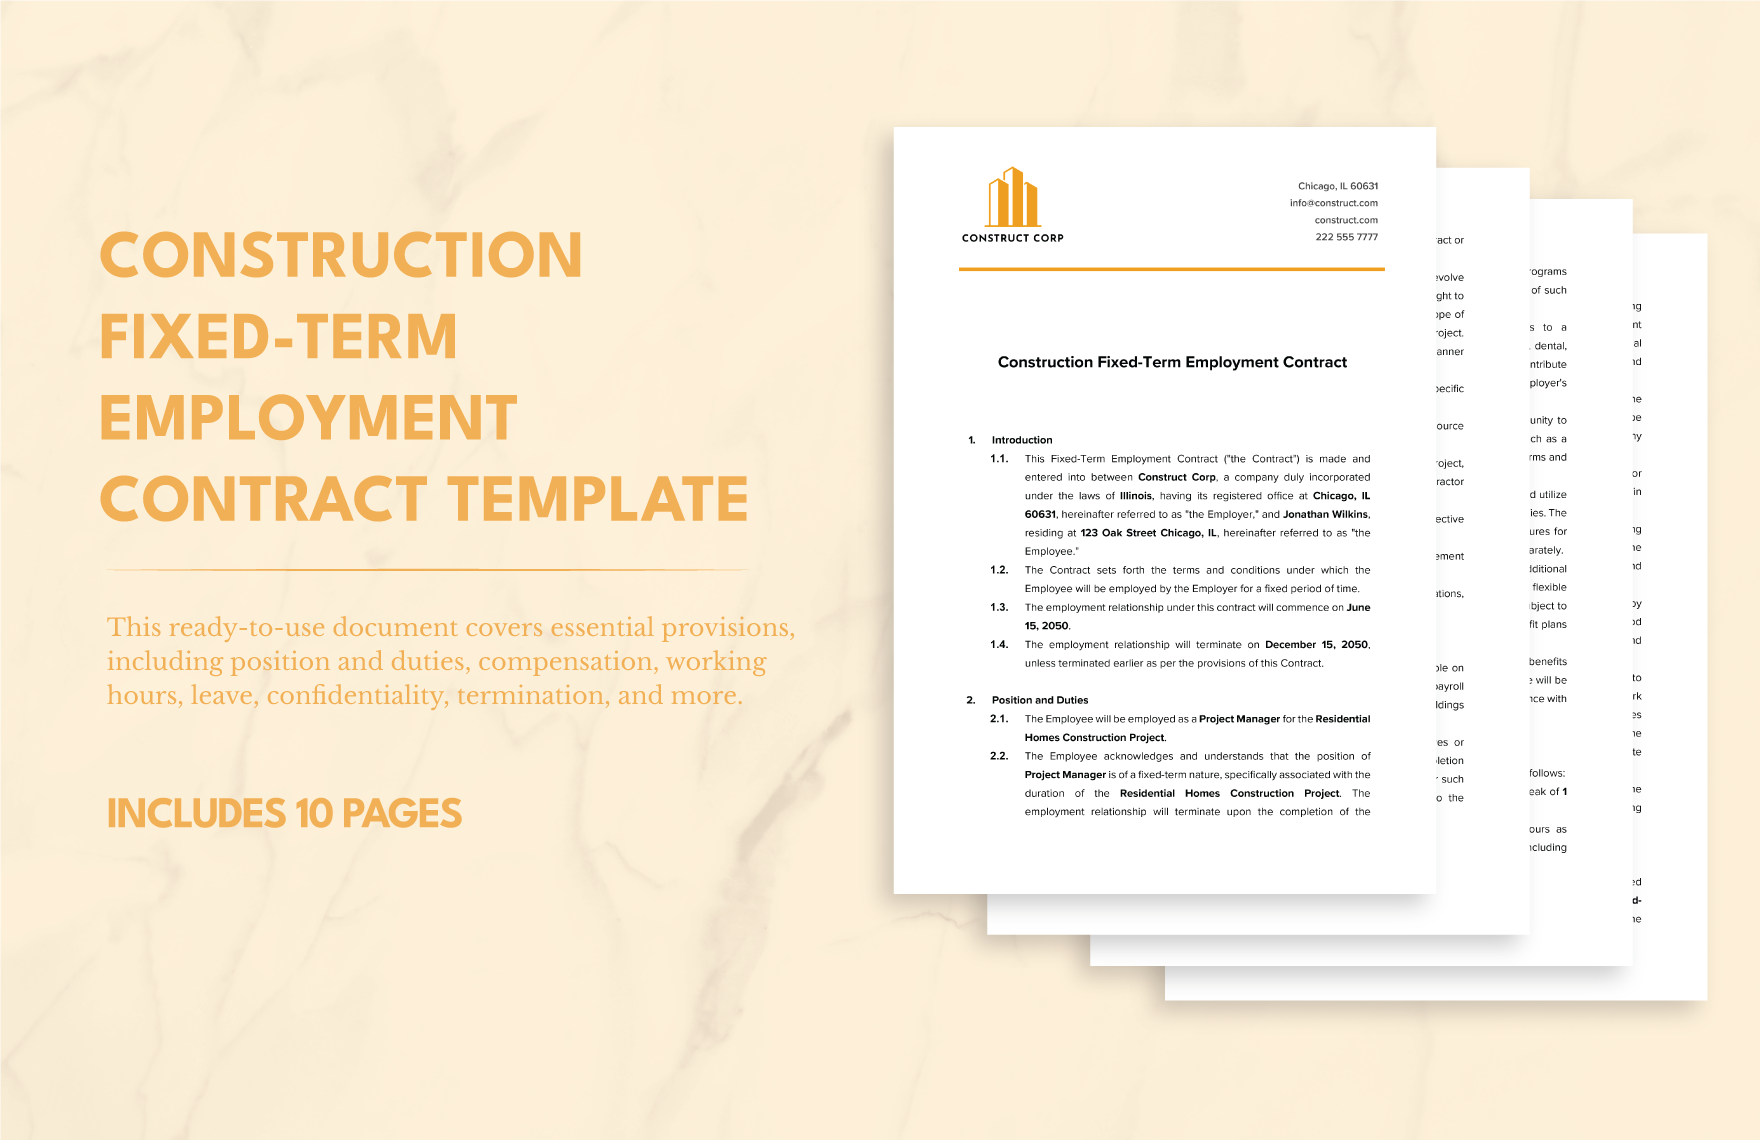 Construction Fixed-Term Employment Contract Template